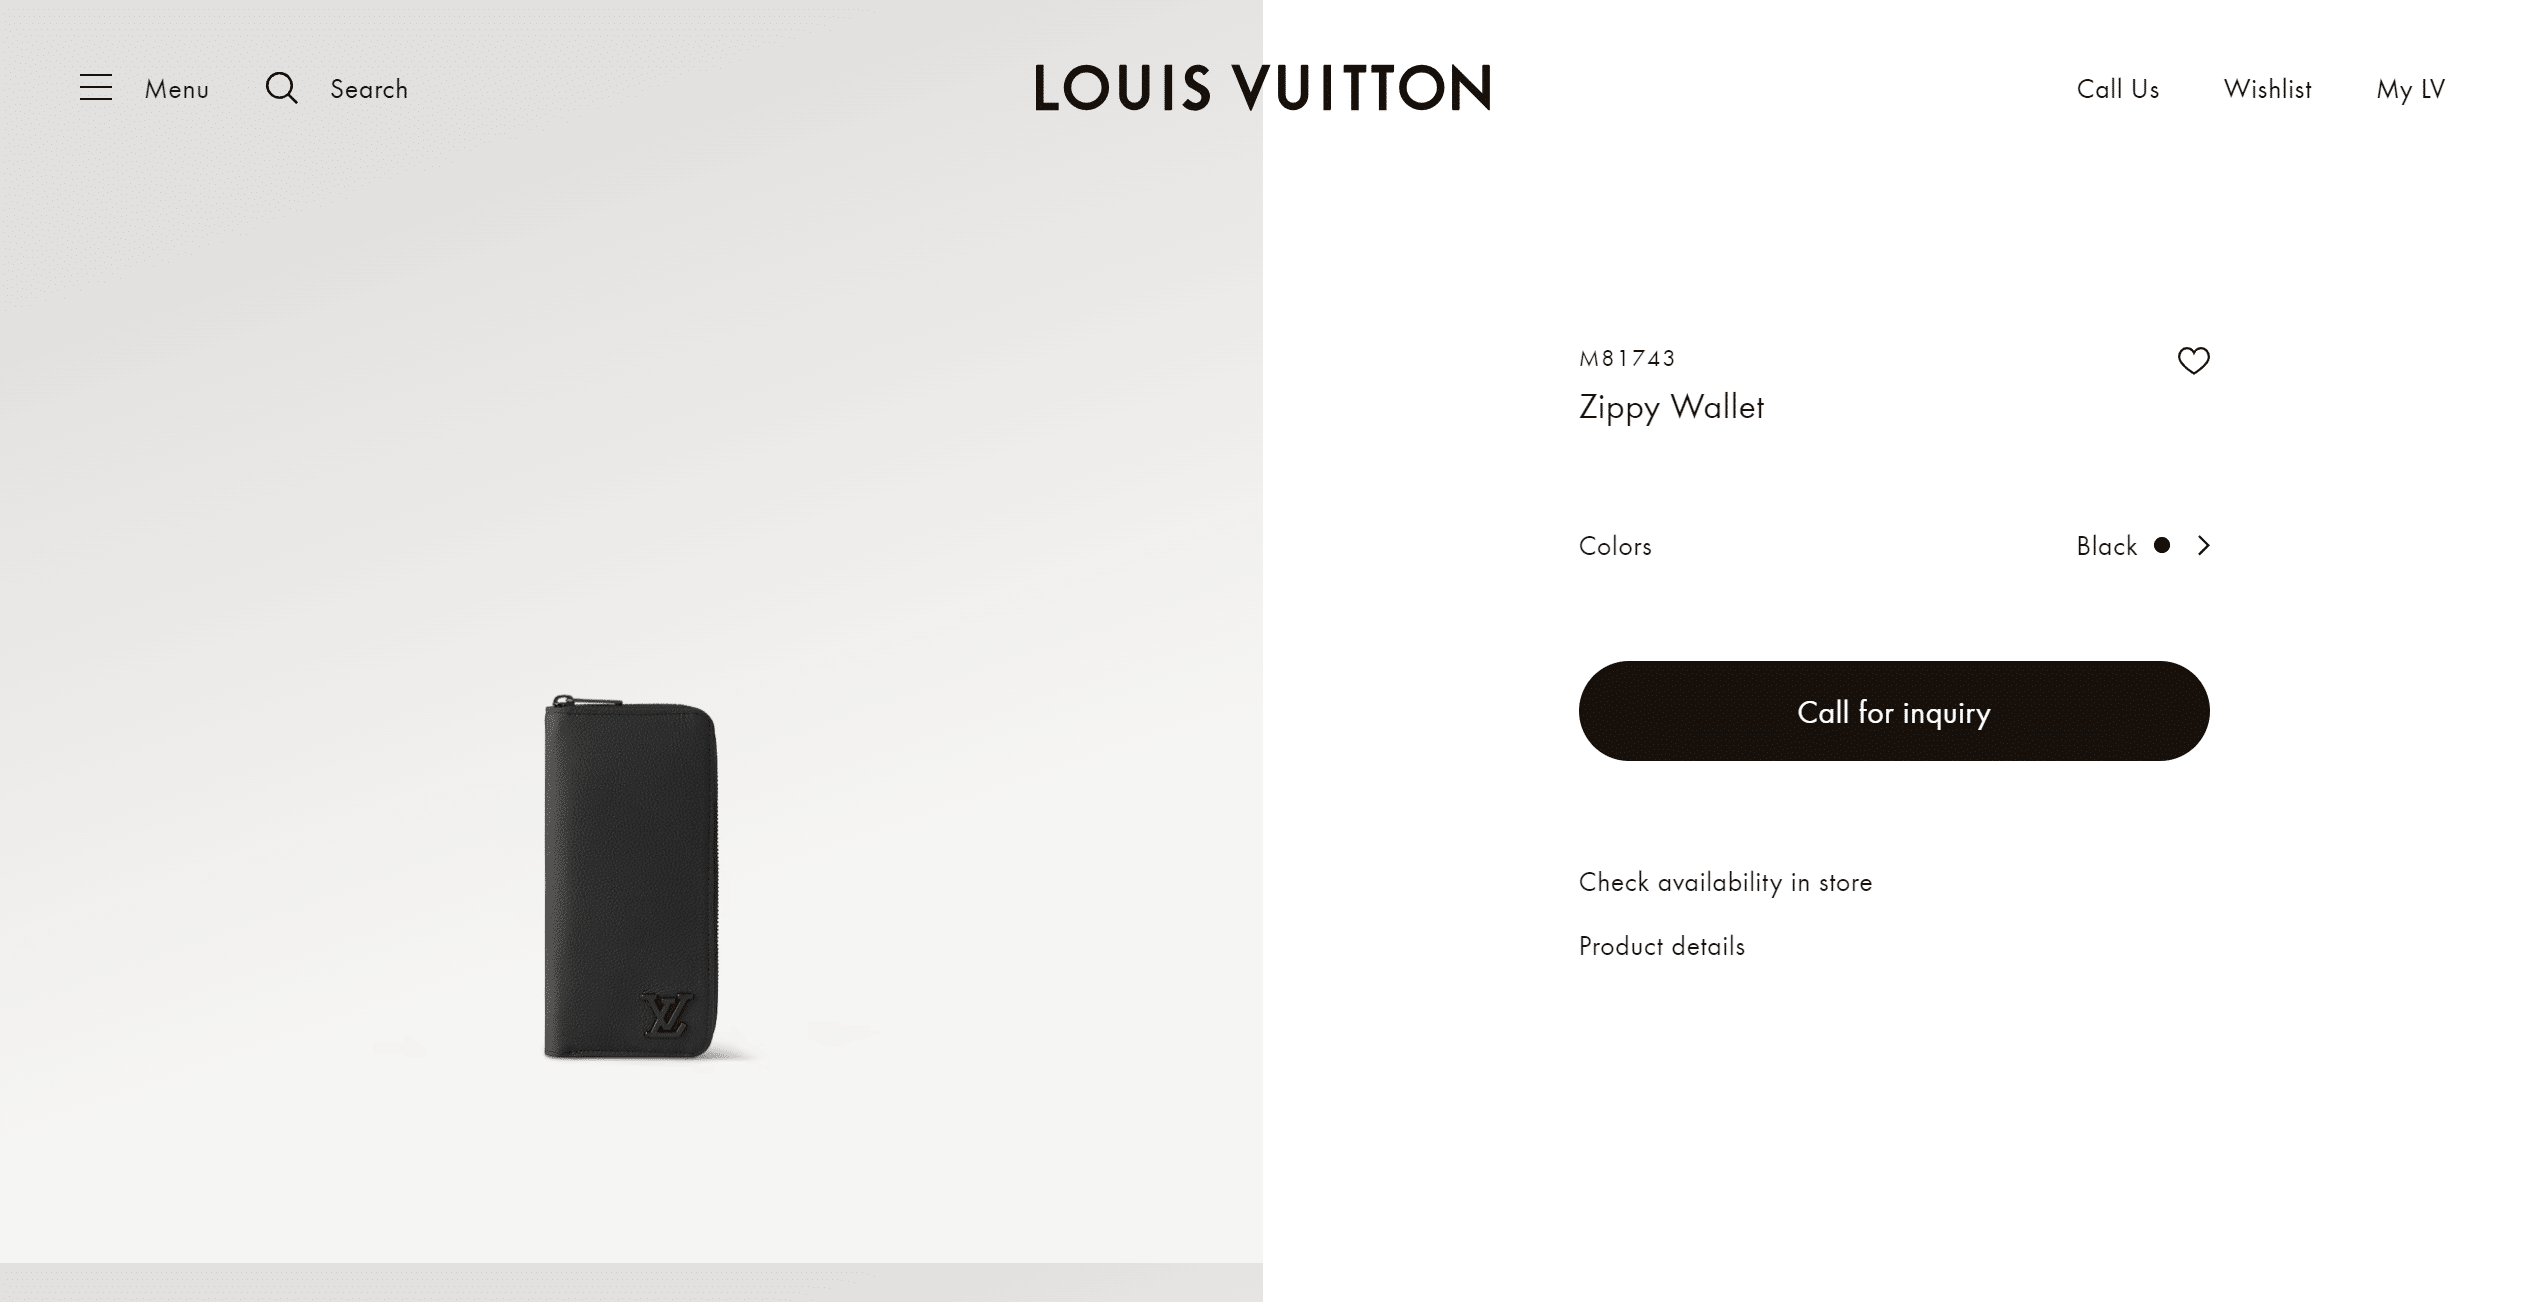 Zippy-Wallet-LV-AEROGRAM-Wallets-and-Small-Leather-Goods-LOUIS-VUITTON.png